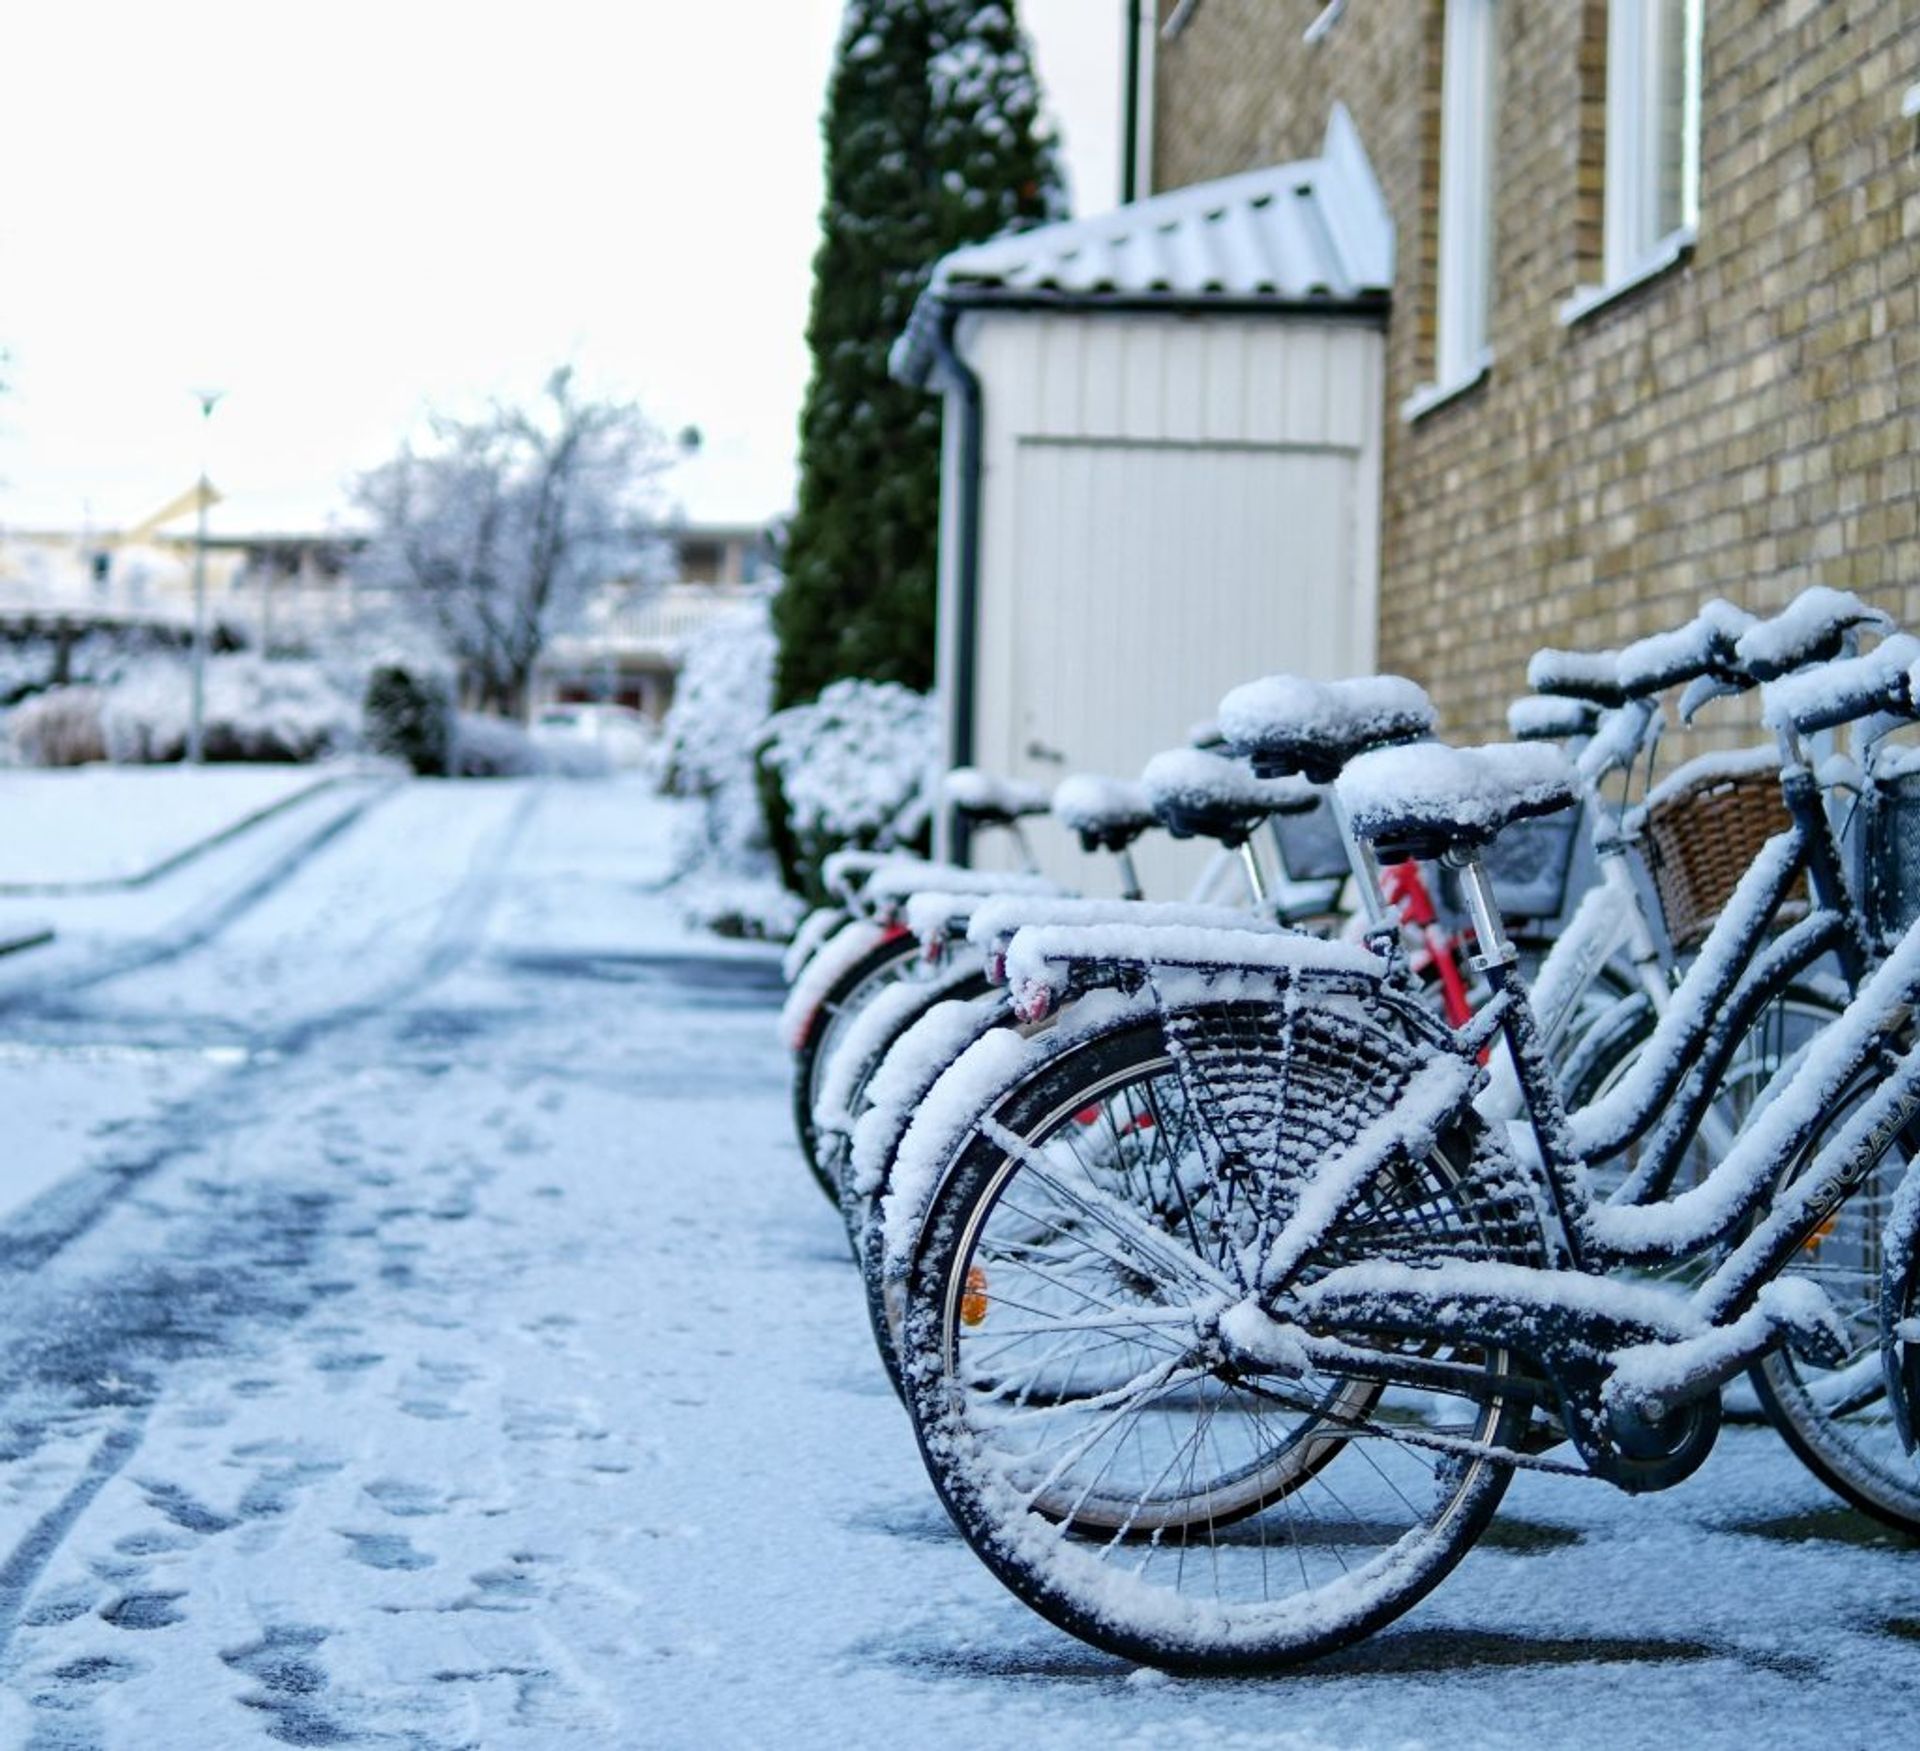 Snow on bikes parked outside.